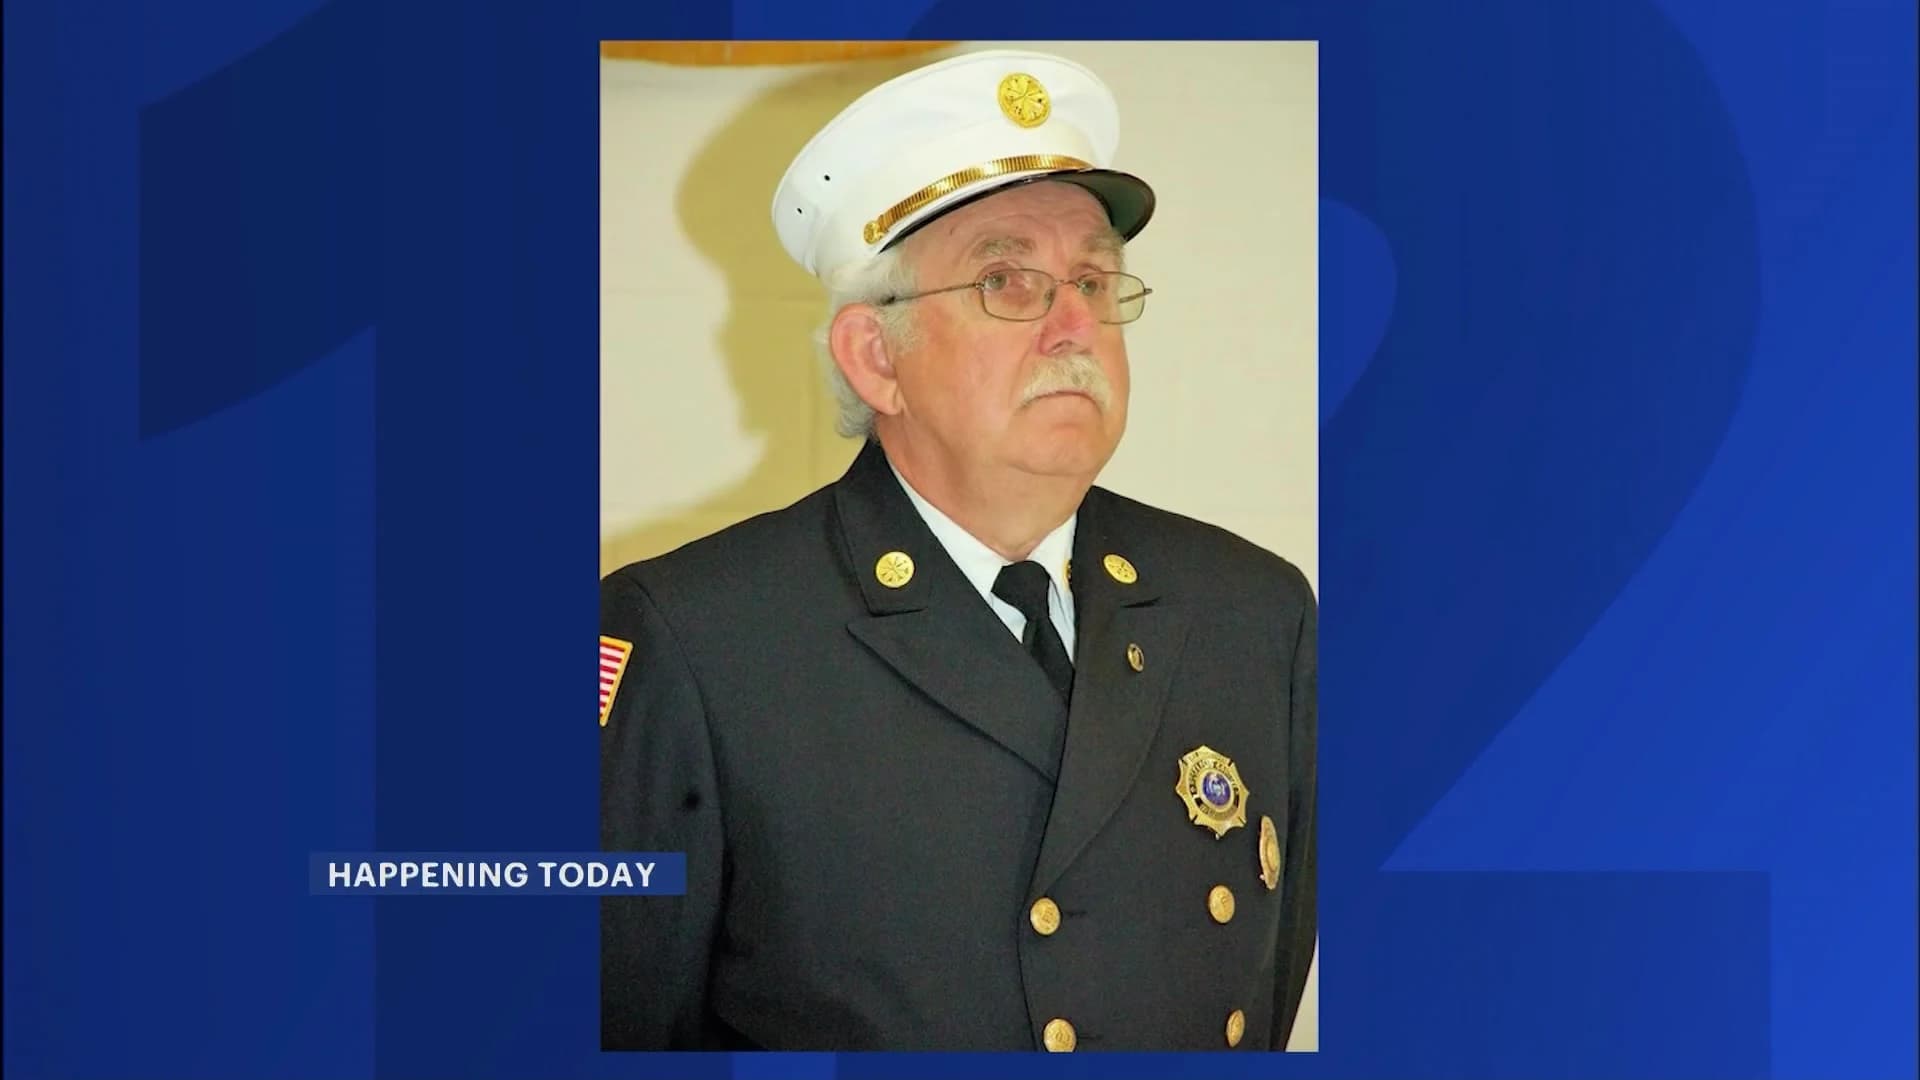 Rockland County mourns loss of fire service legend